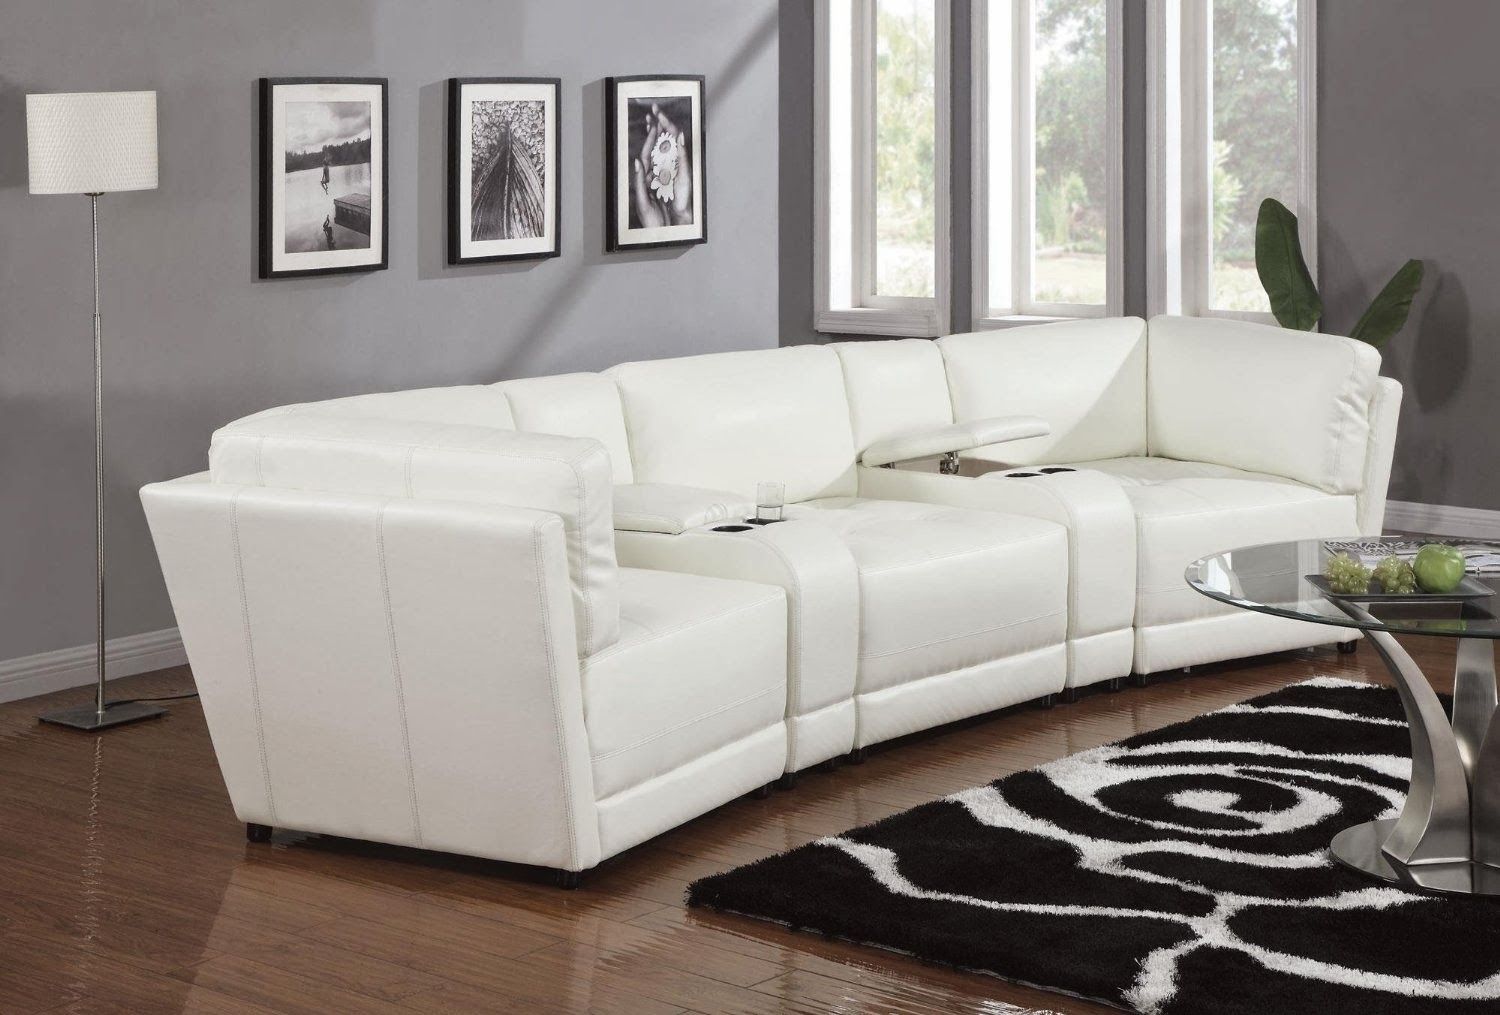 Petite Sectional Sofa – Cleanupflorida Pertaining To Vancouver Sectional Sofas (View 6 of 10)